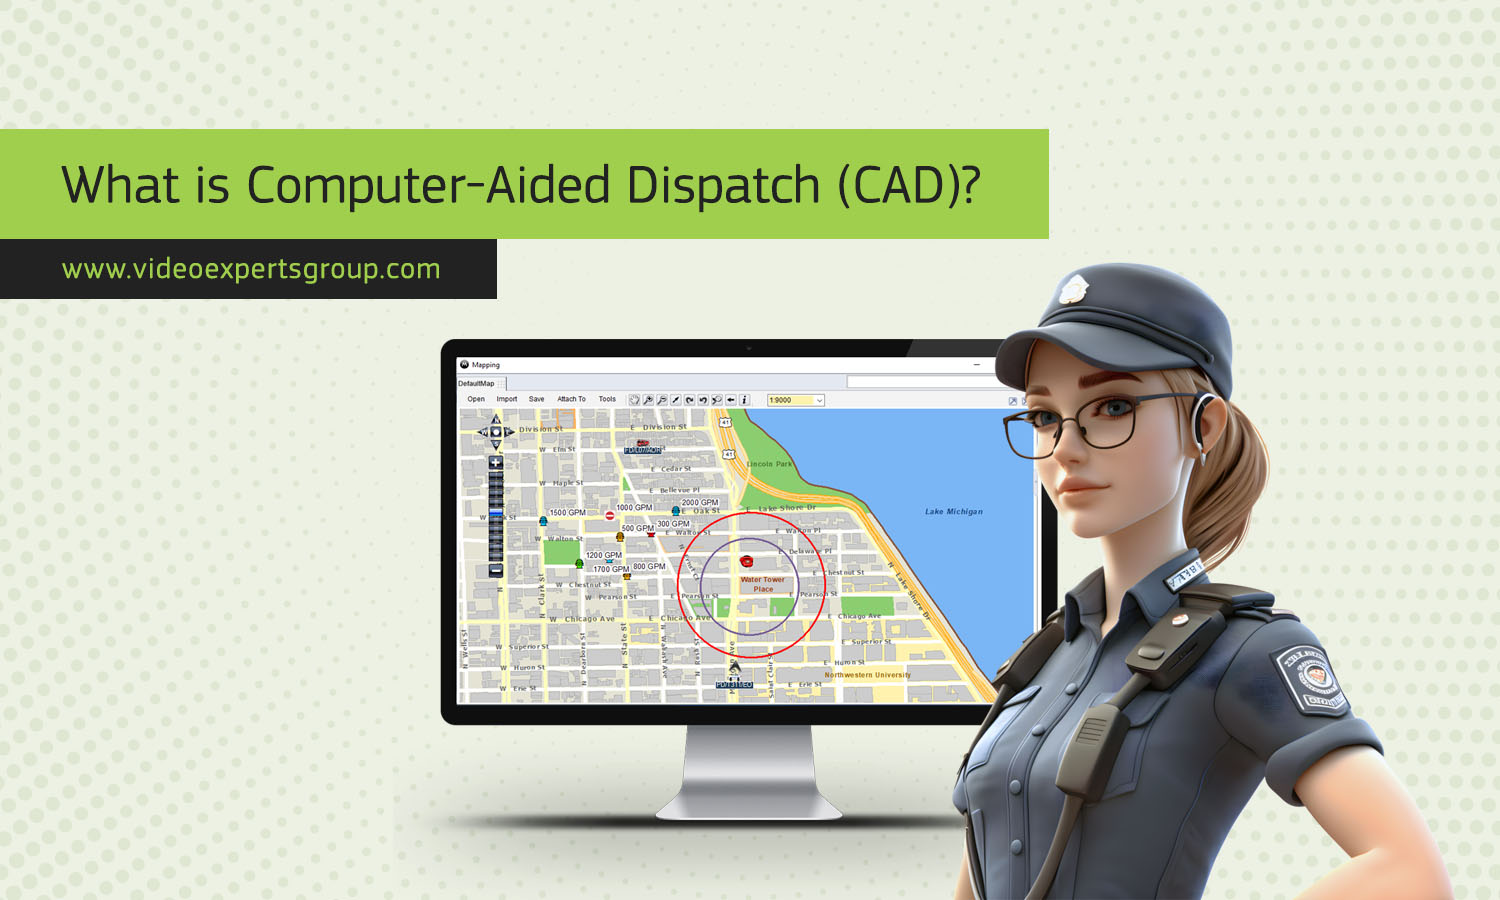 What is Computer-Aided Dispatch (CAD)?